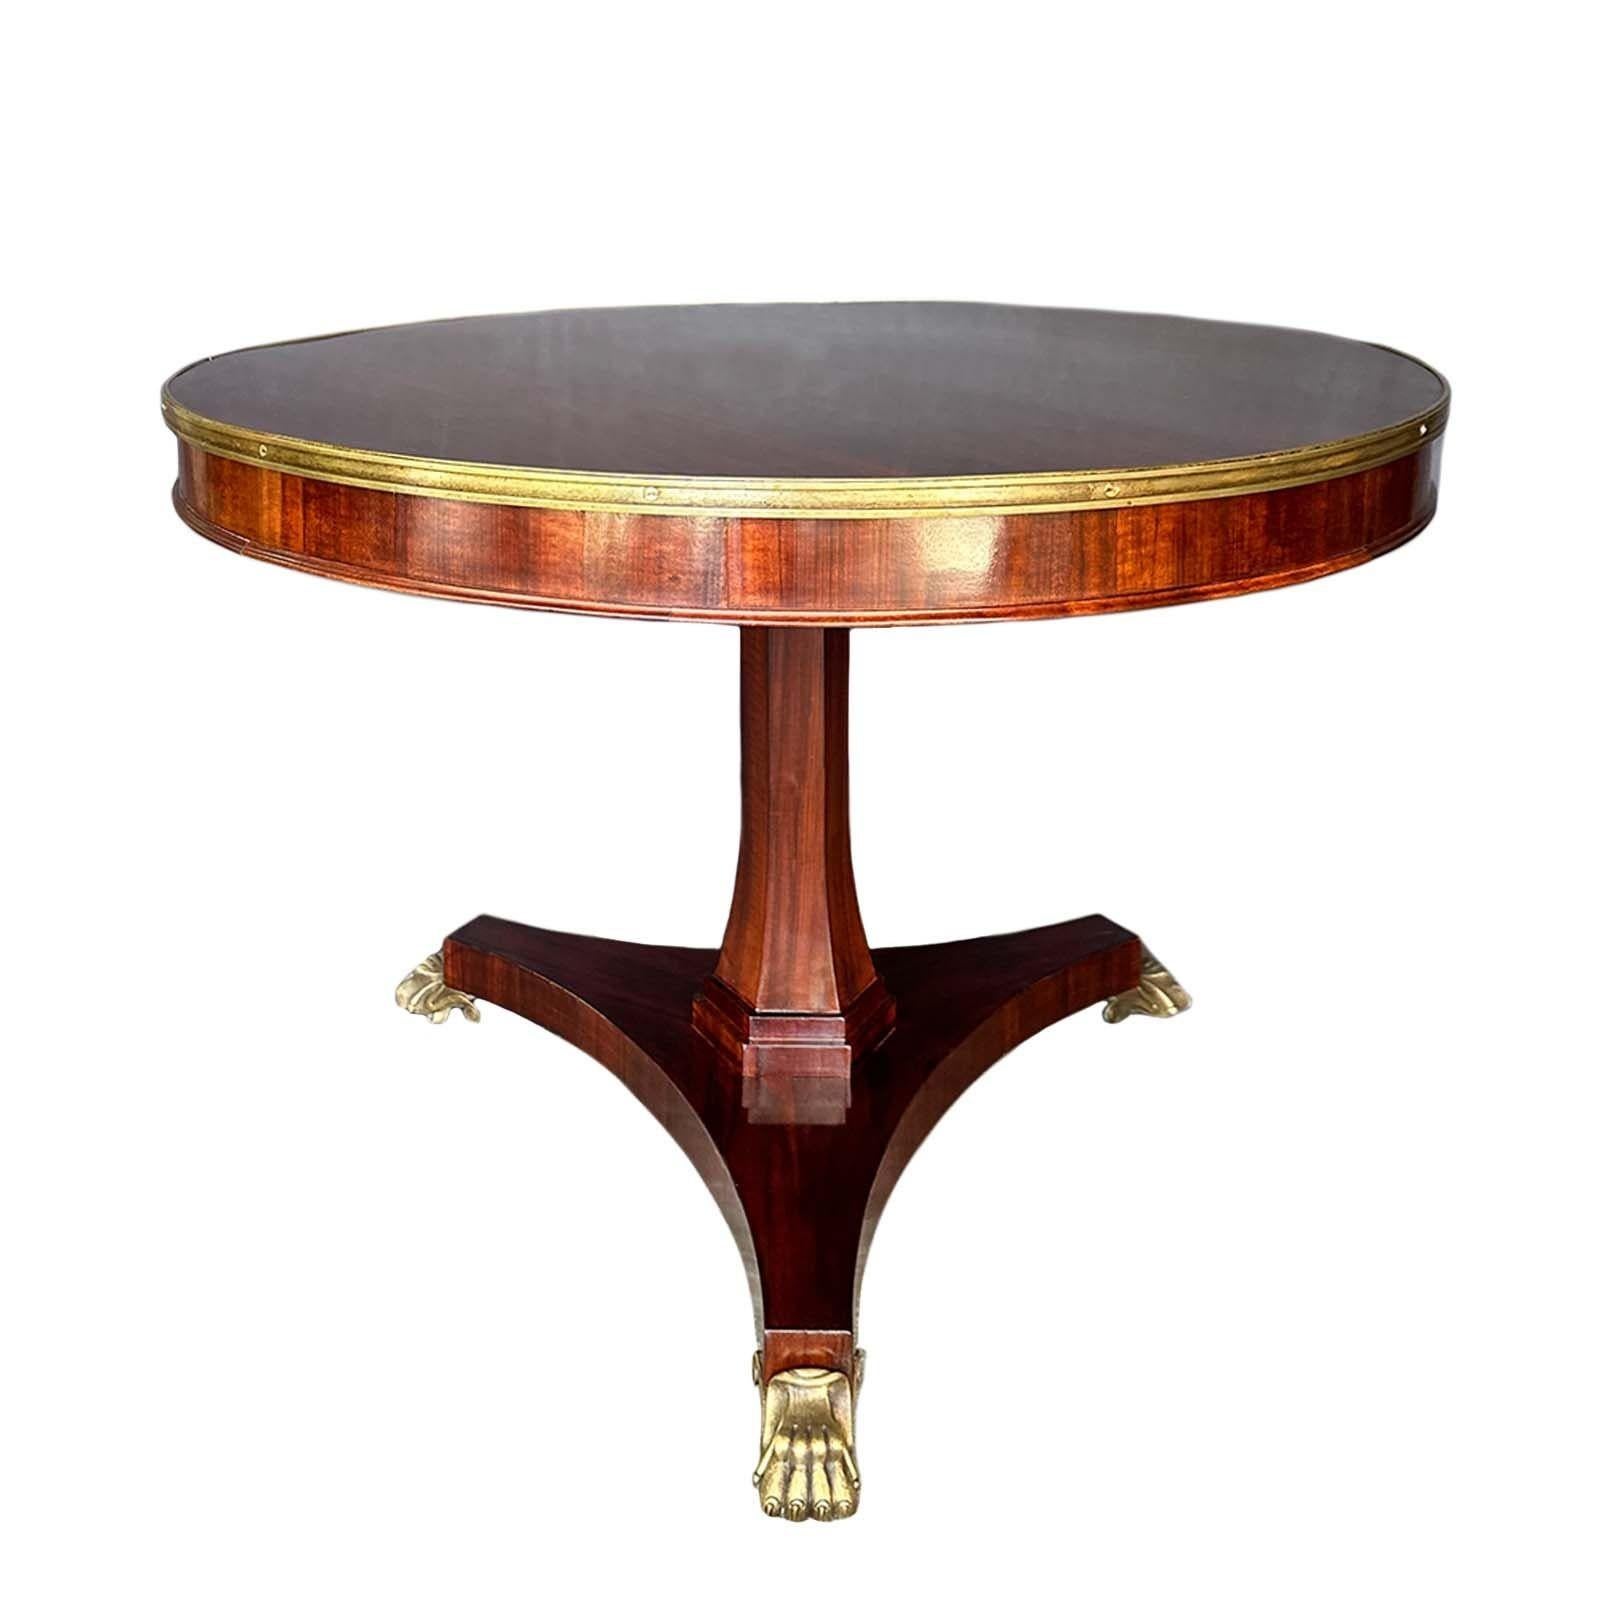 Amazing 19th Century English Regency tilt-top center table crafted from rosewood. The table's opulence is accentuated by its meticulous bronze mounts, adding a touch of timeless elegance to any space. Supported by sturdy bronze lion paws, this table